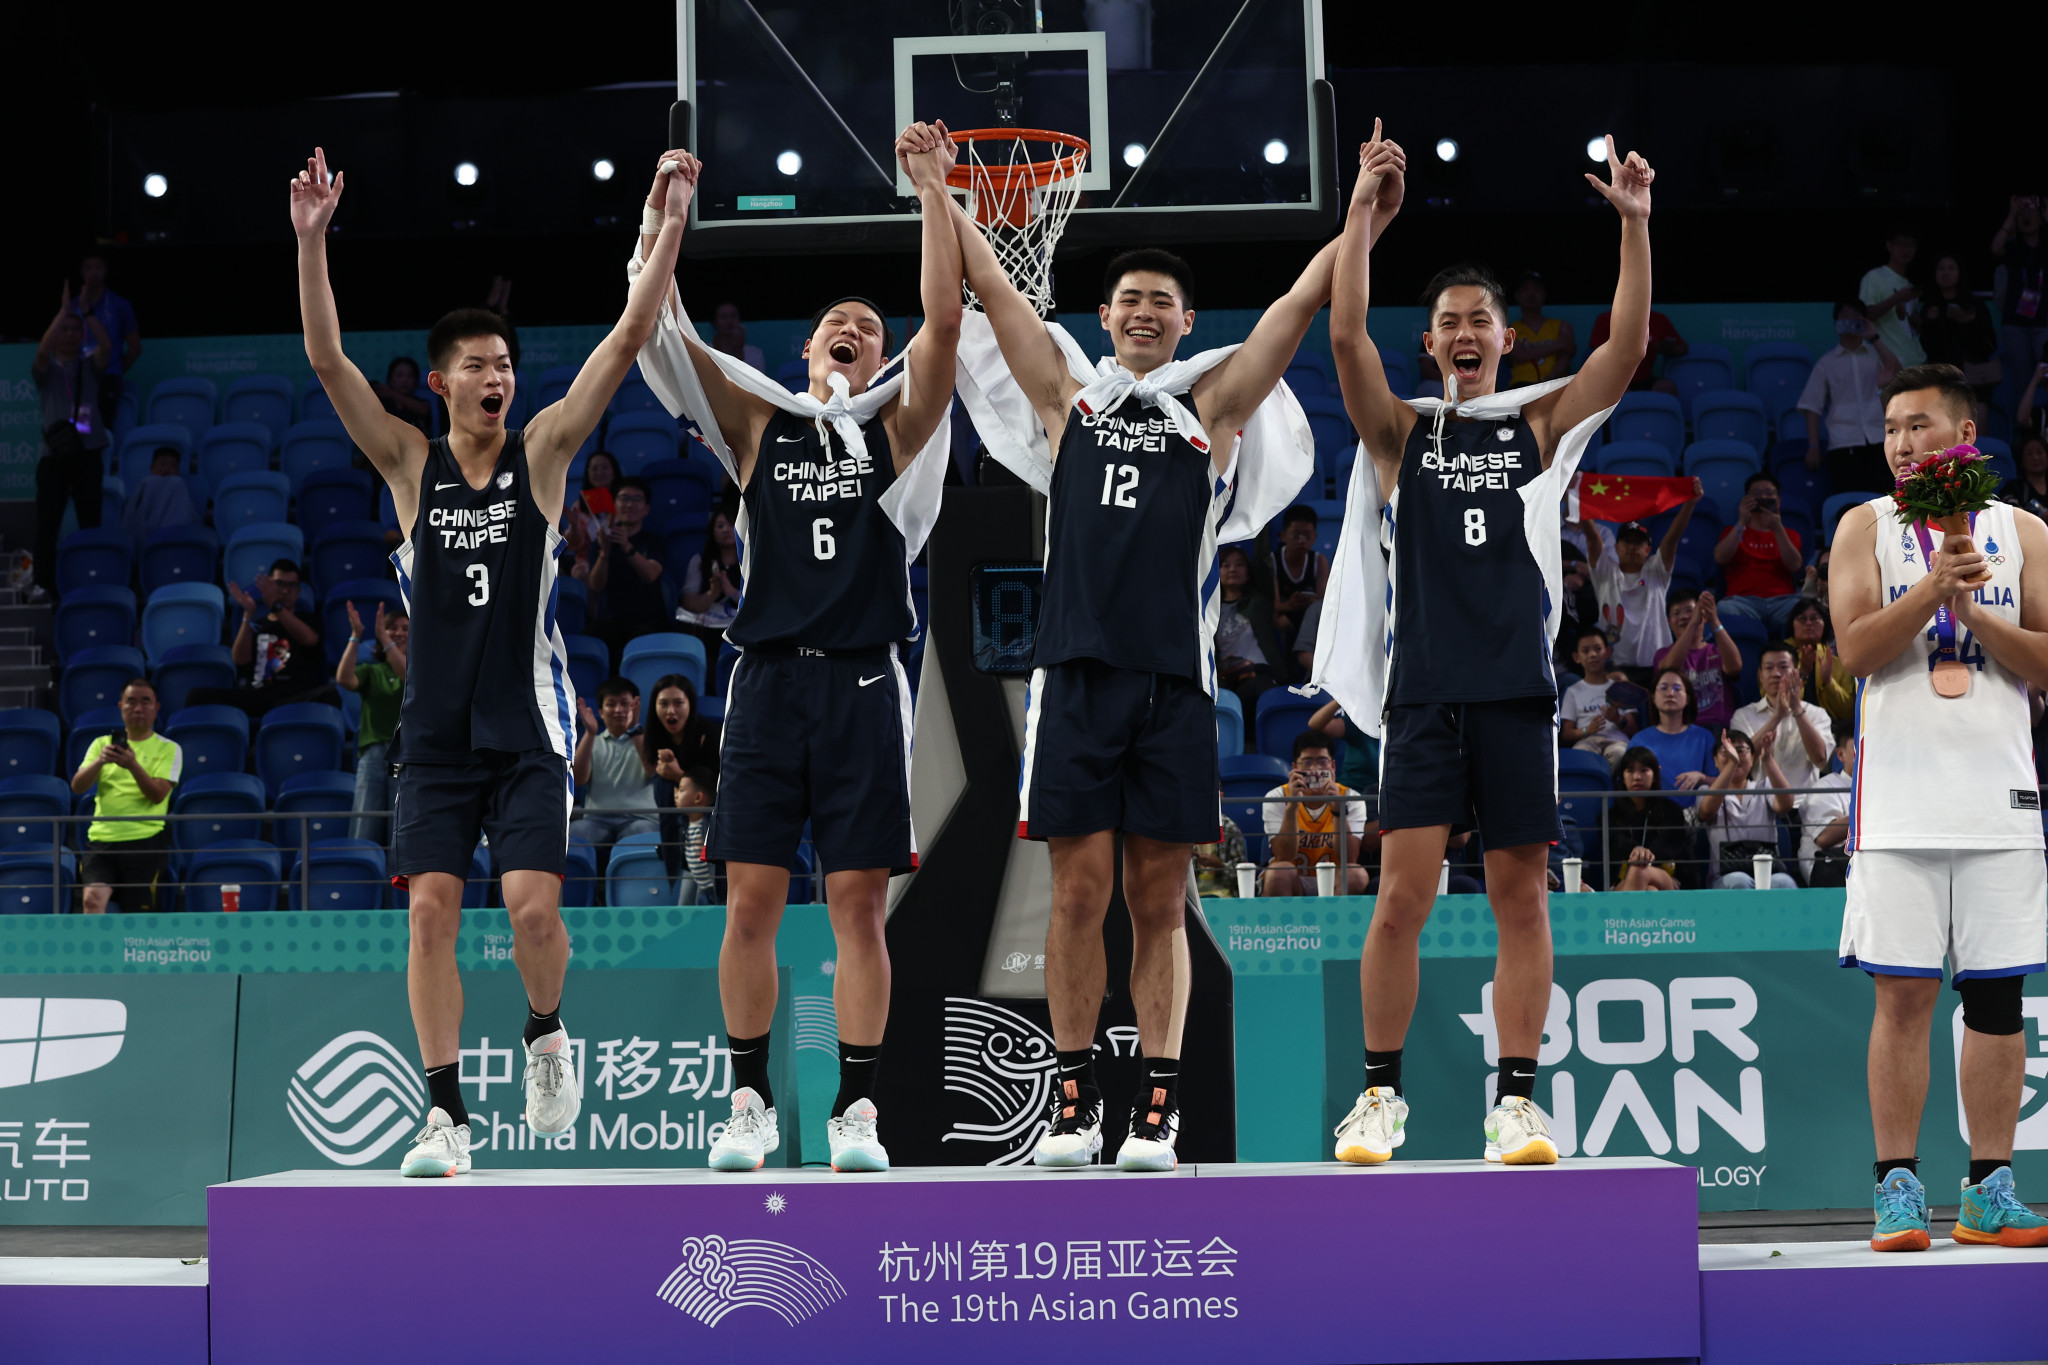 Home crowd roars for Chinese Taipei in late 3x3 basketball glory at Hangzhou 2022